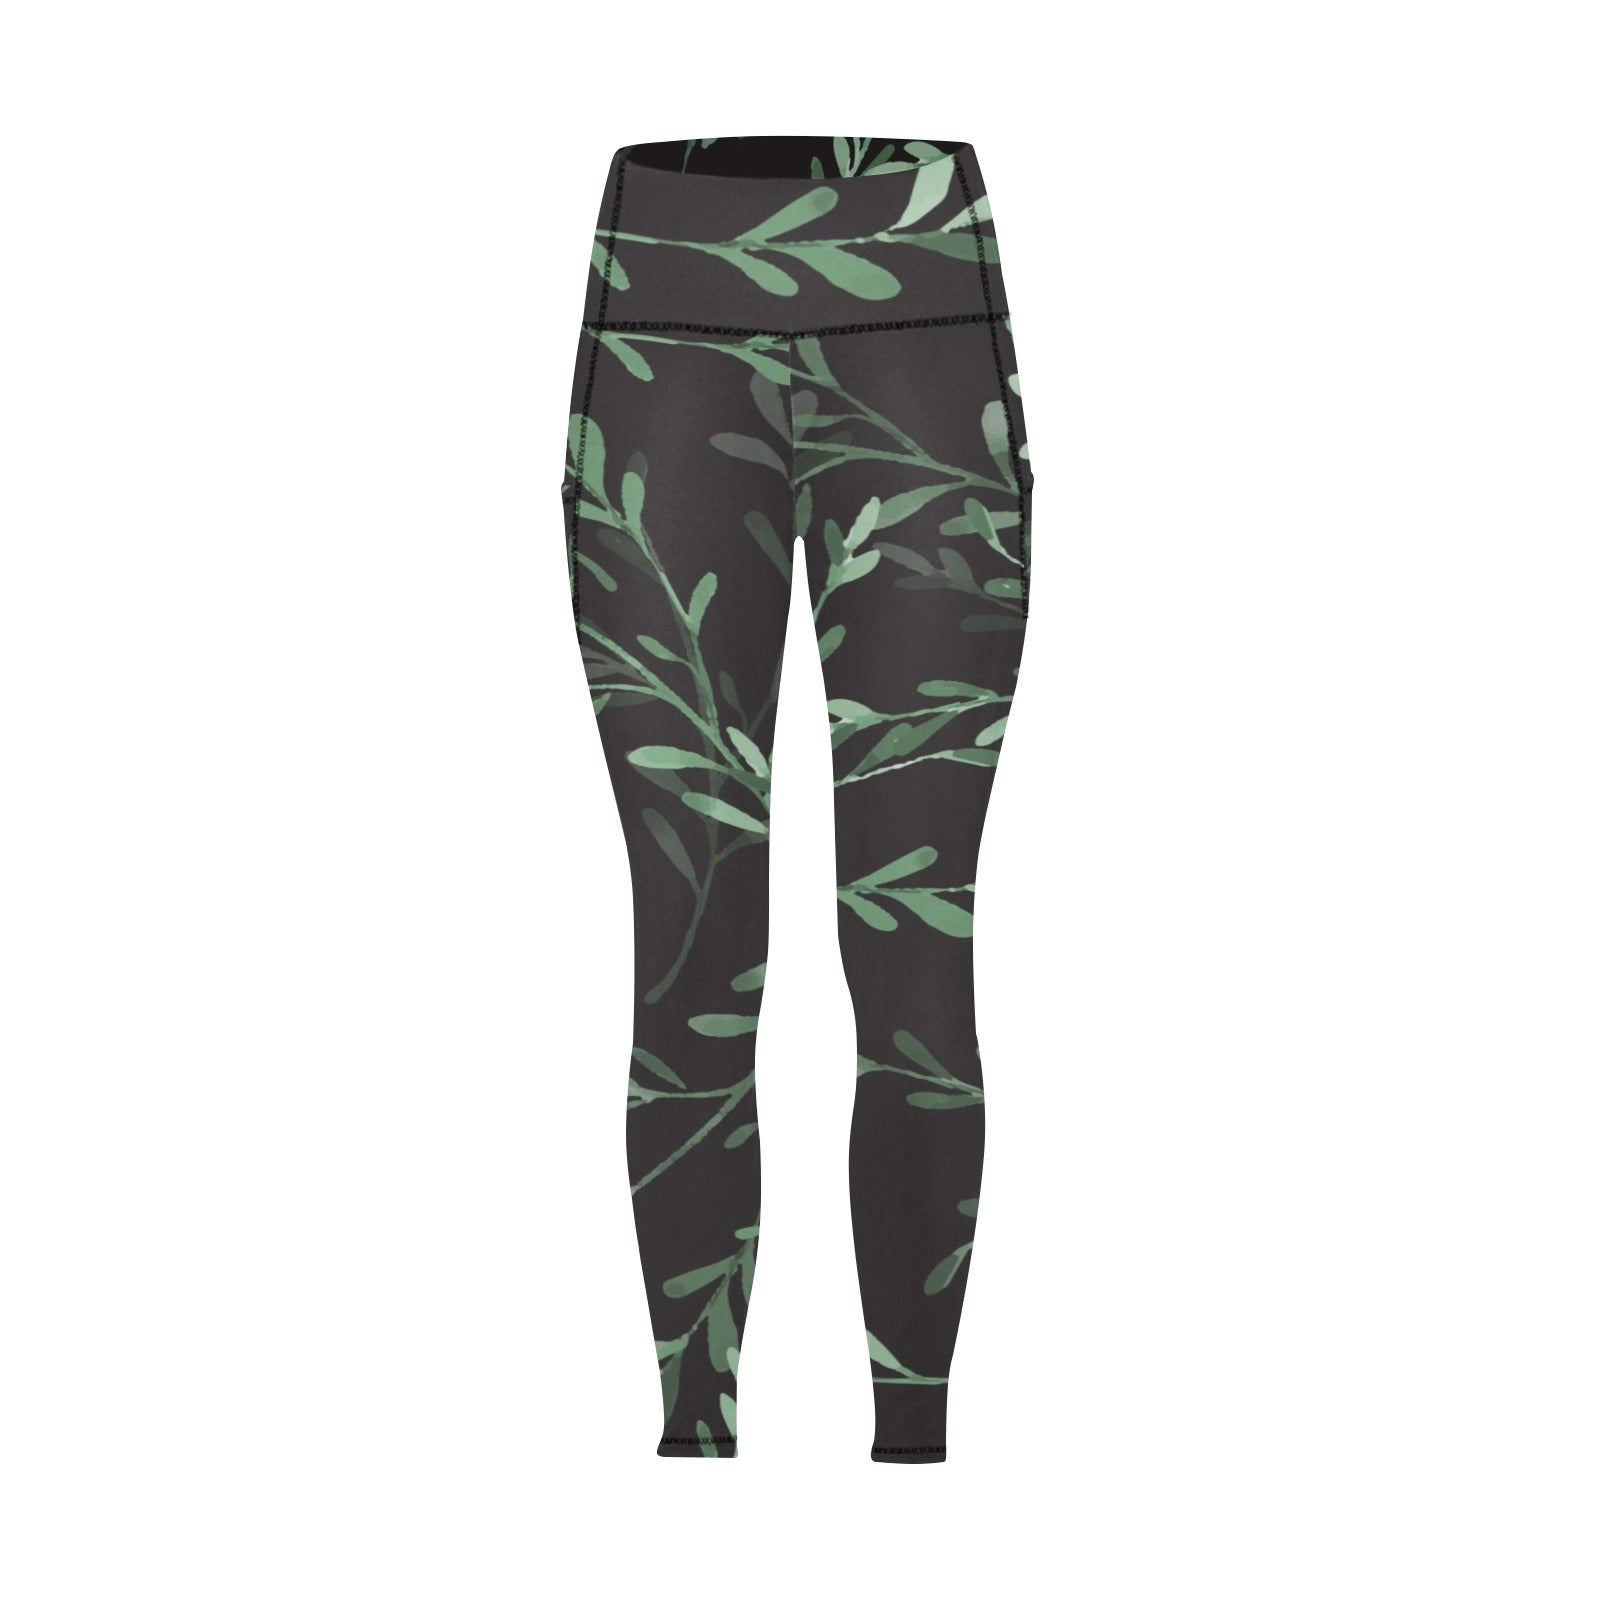 Delicate Leaves - Women's Leggings with Pockets Women's Leggings with Pockets S - 2XL Plants